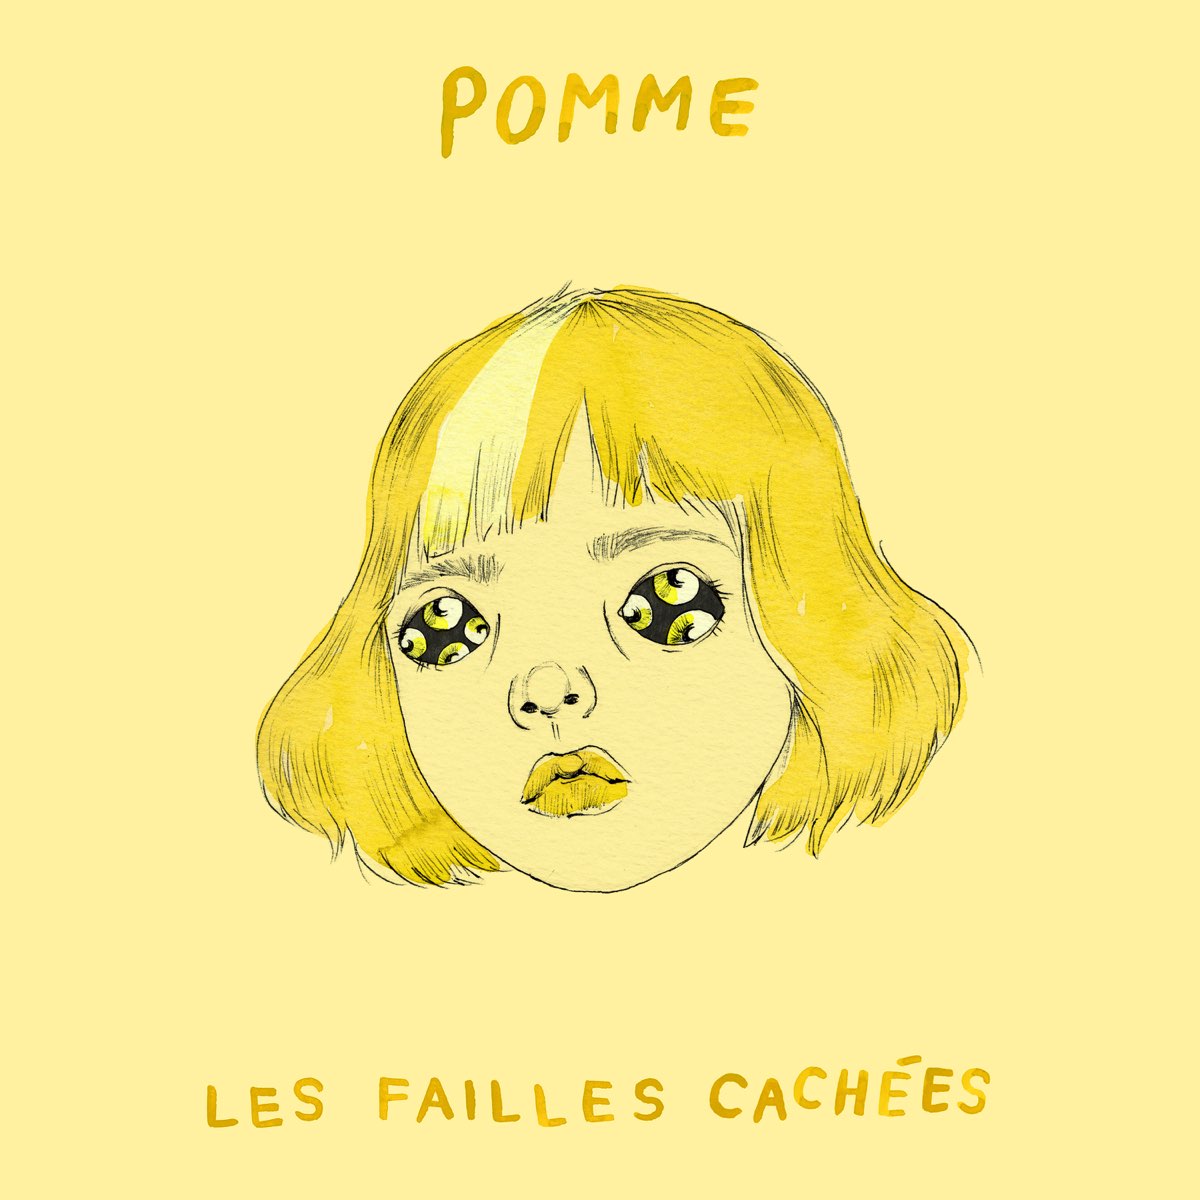 Pomme - Les Failles Cachees - Teenage Head Records